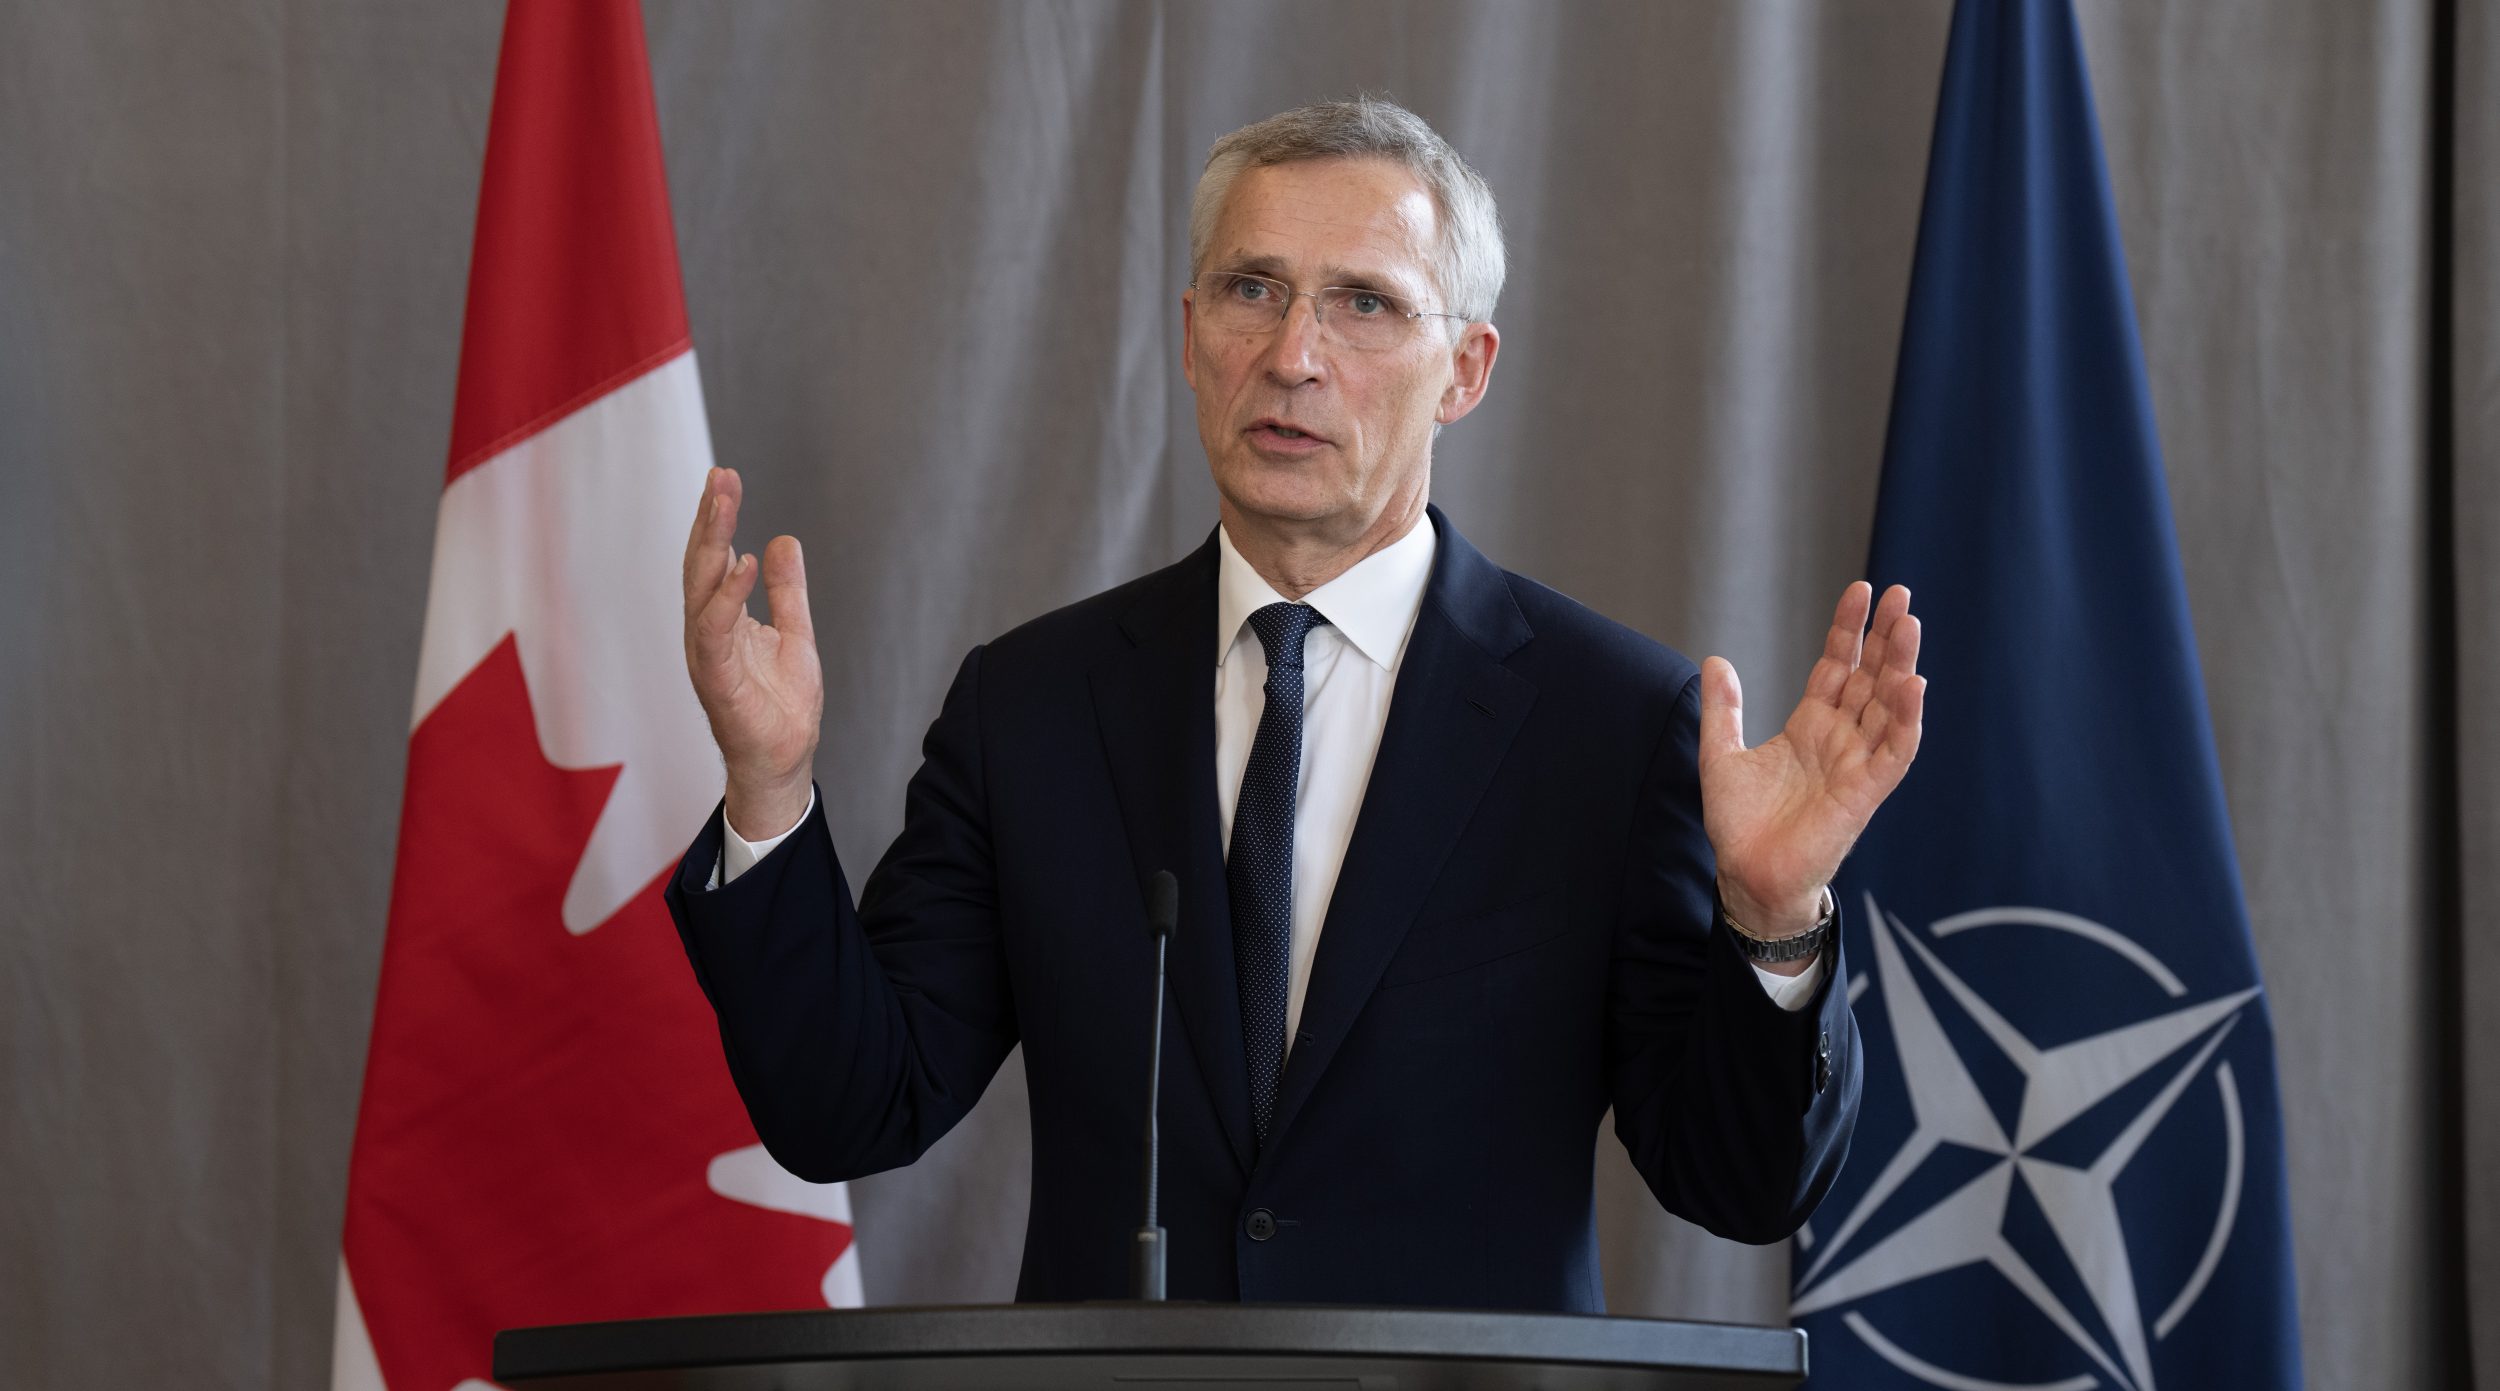 NATO chief commends Canada upping defence spending but stresses 2% target